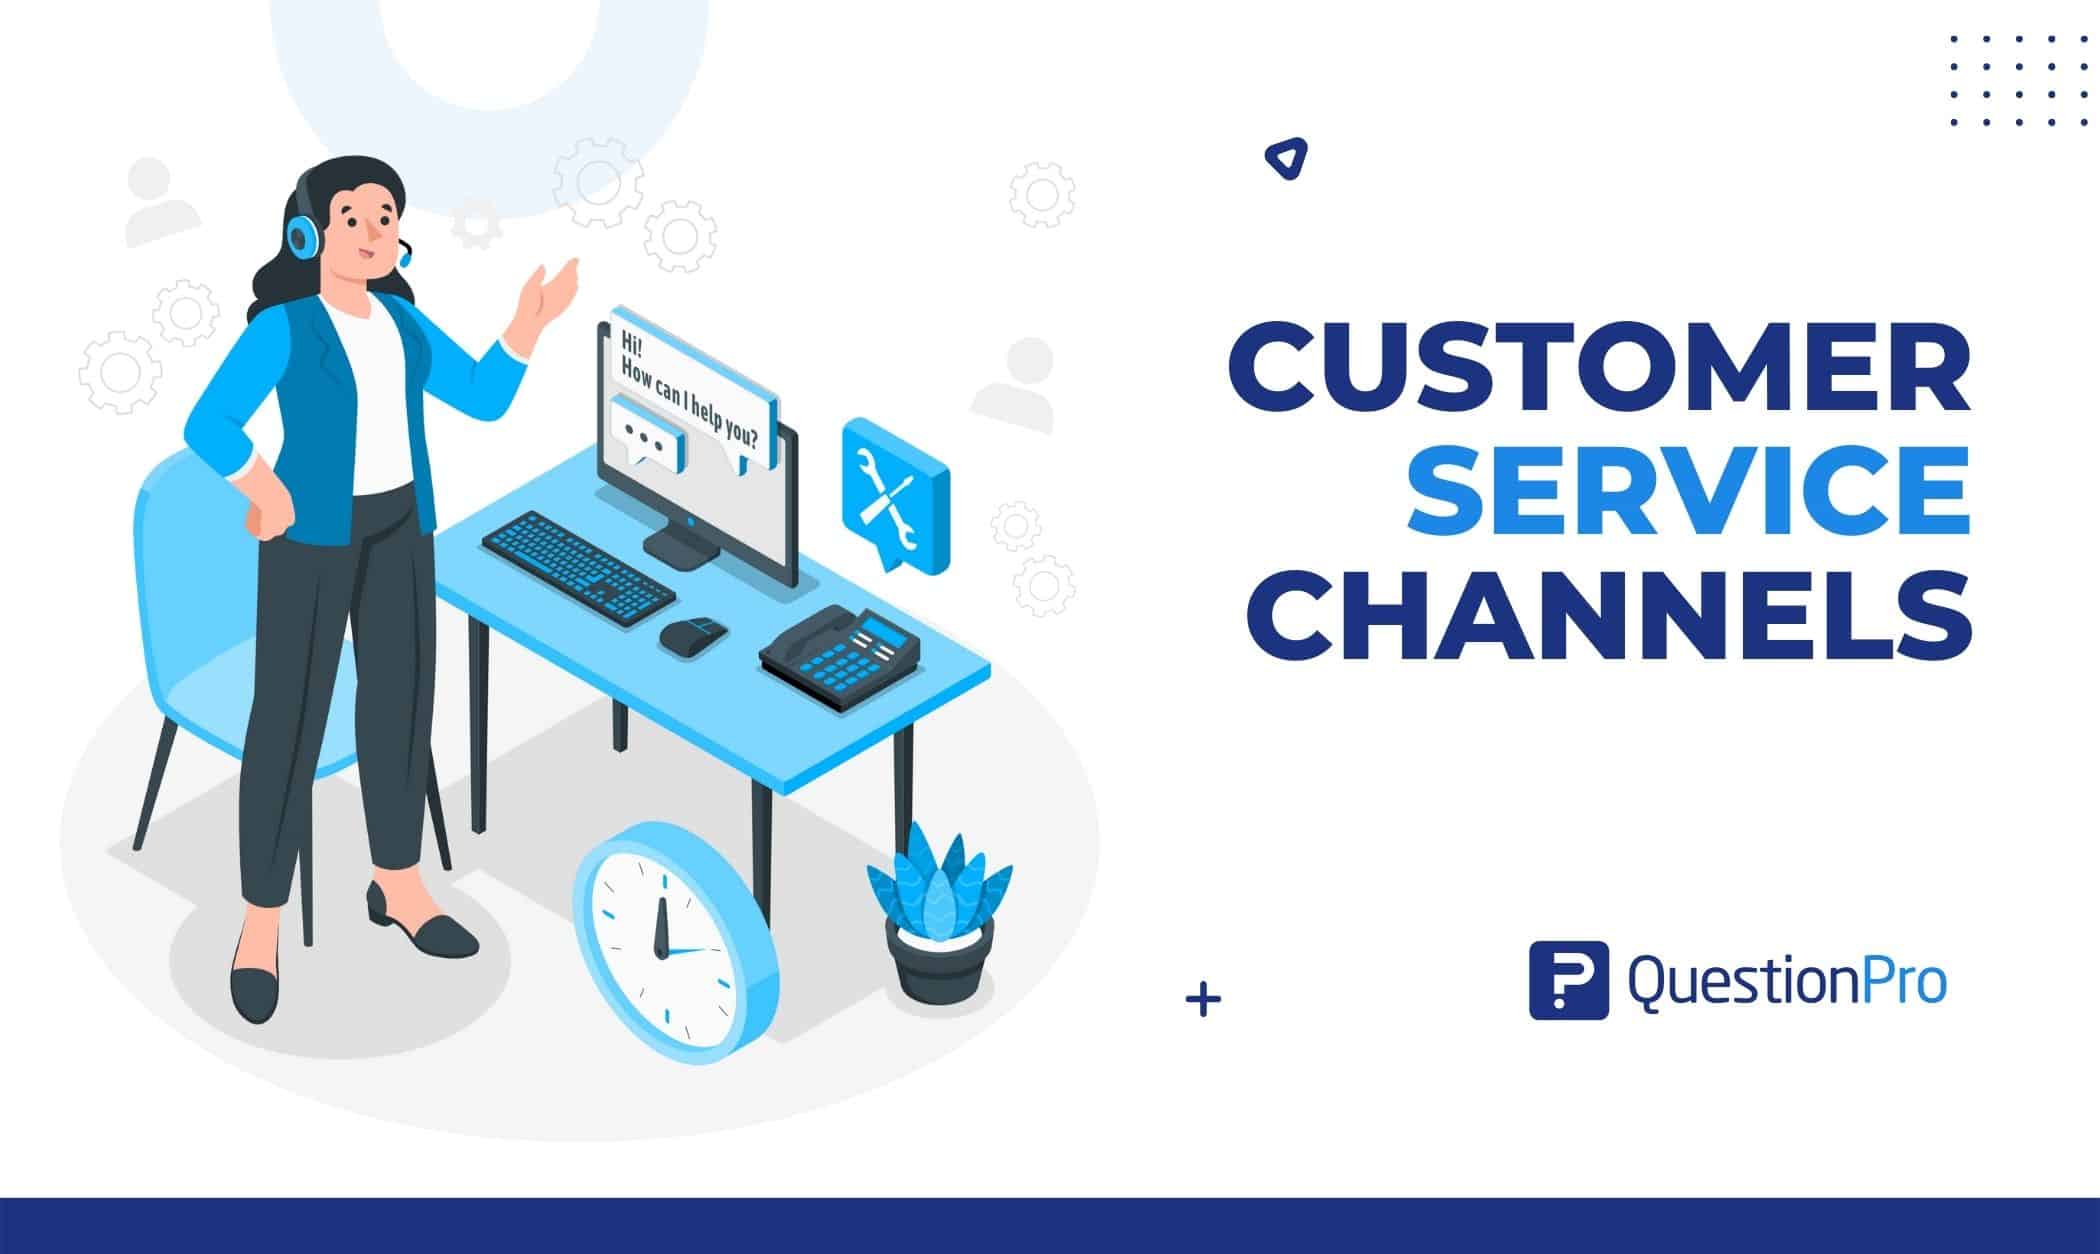 Customer service channels are ways for customers to get in touch with a business while they are on their customer journey. Learn more.